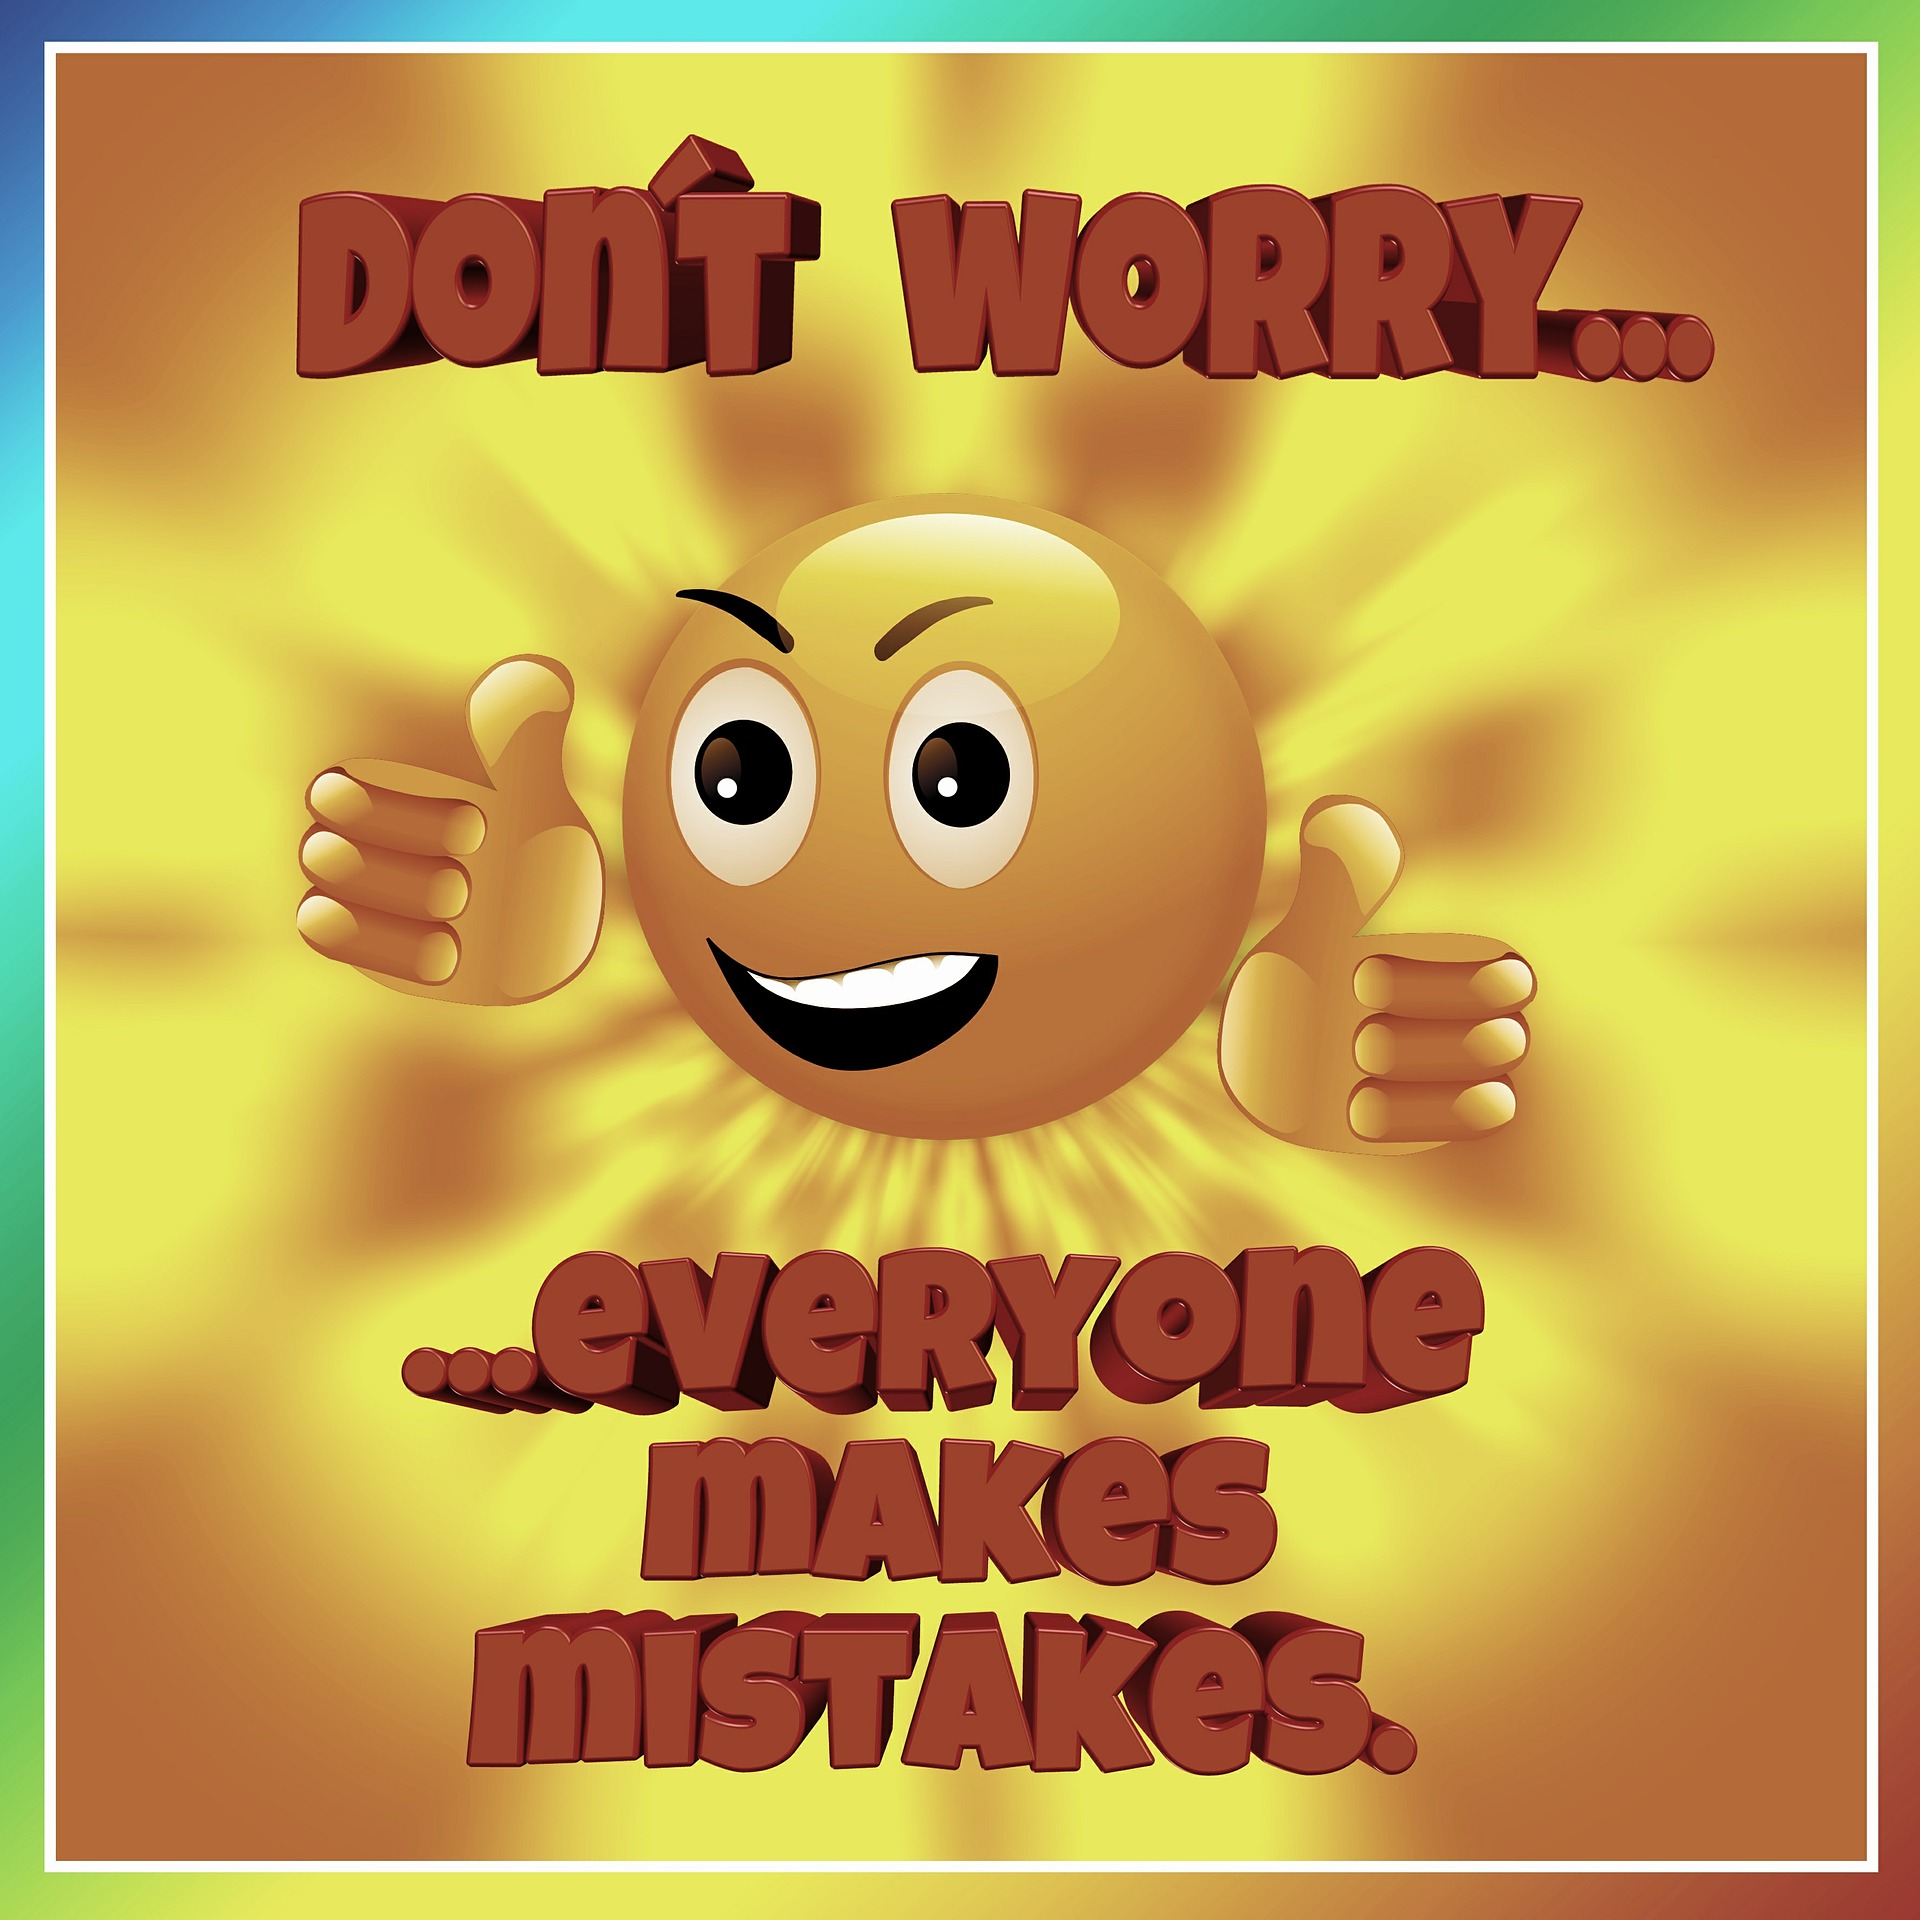 everyone makes mistakes image